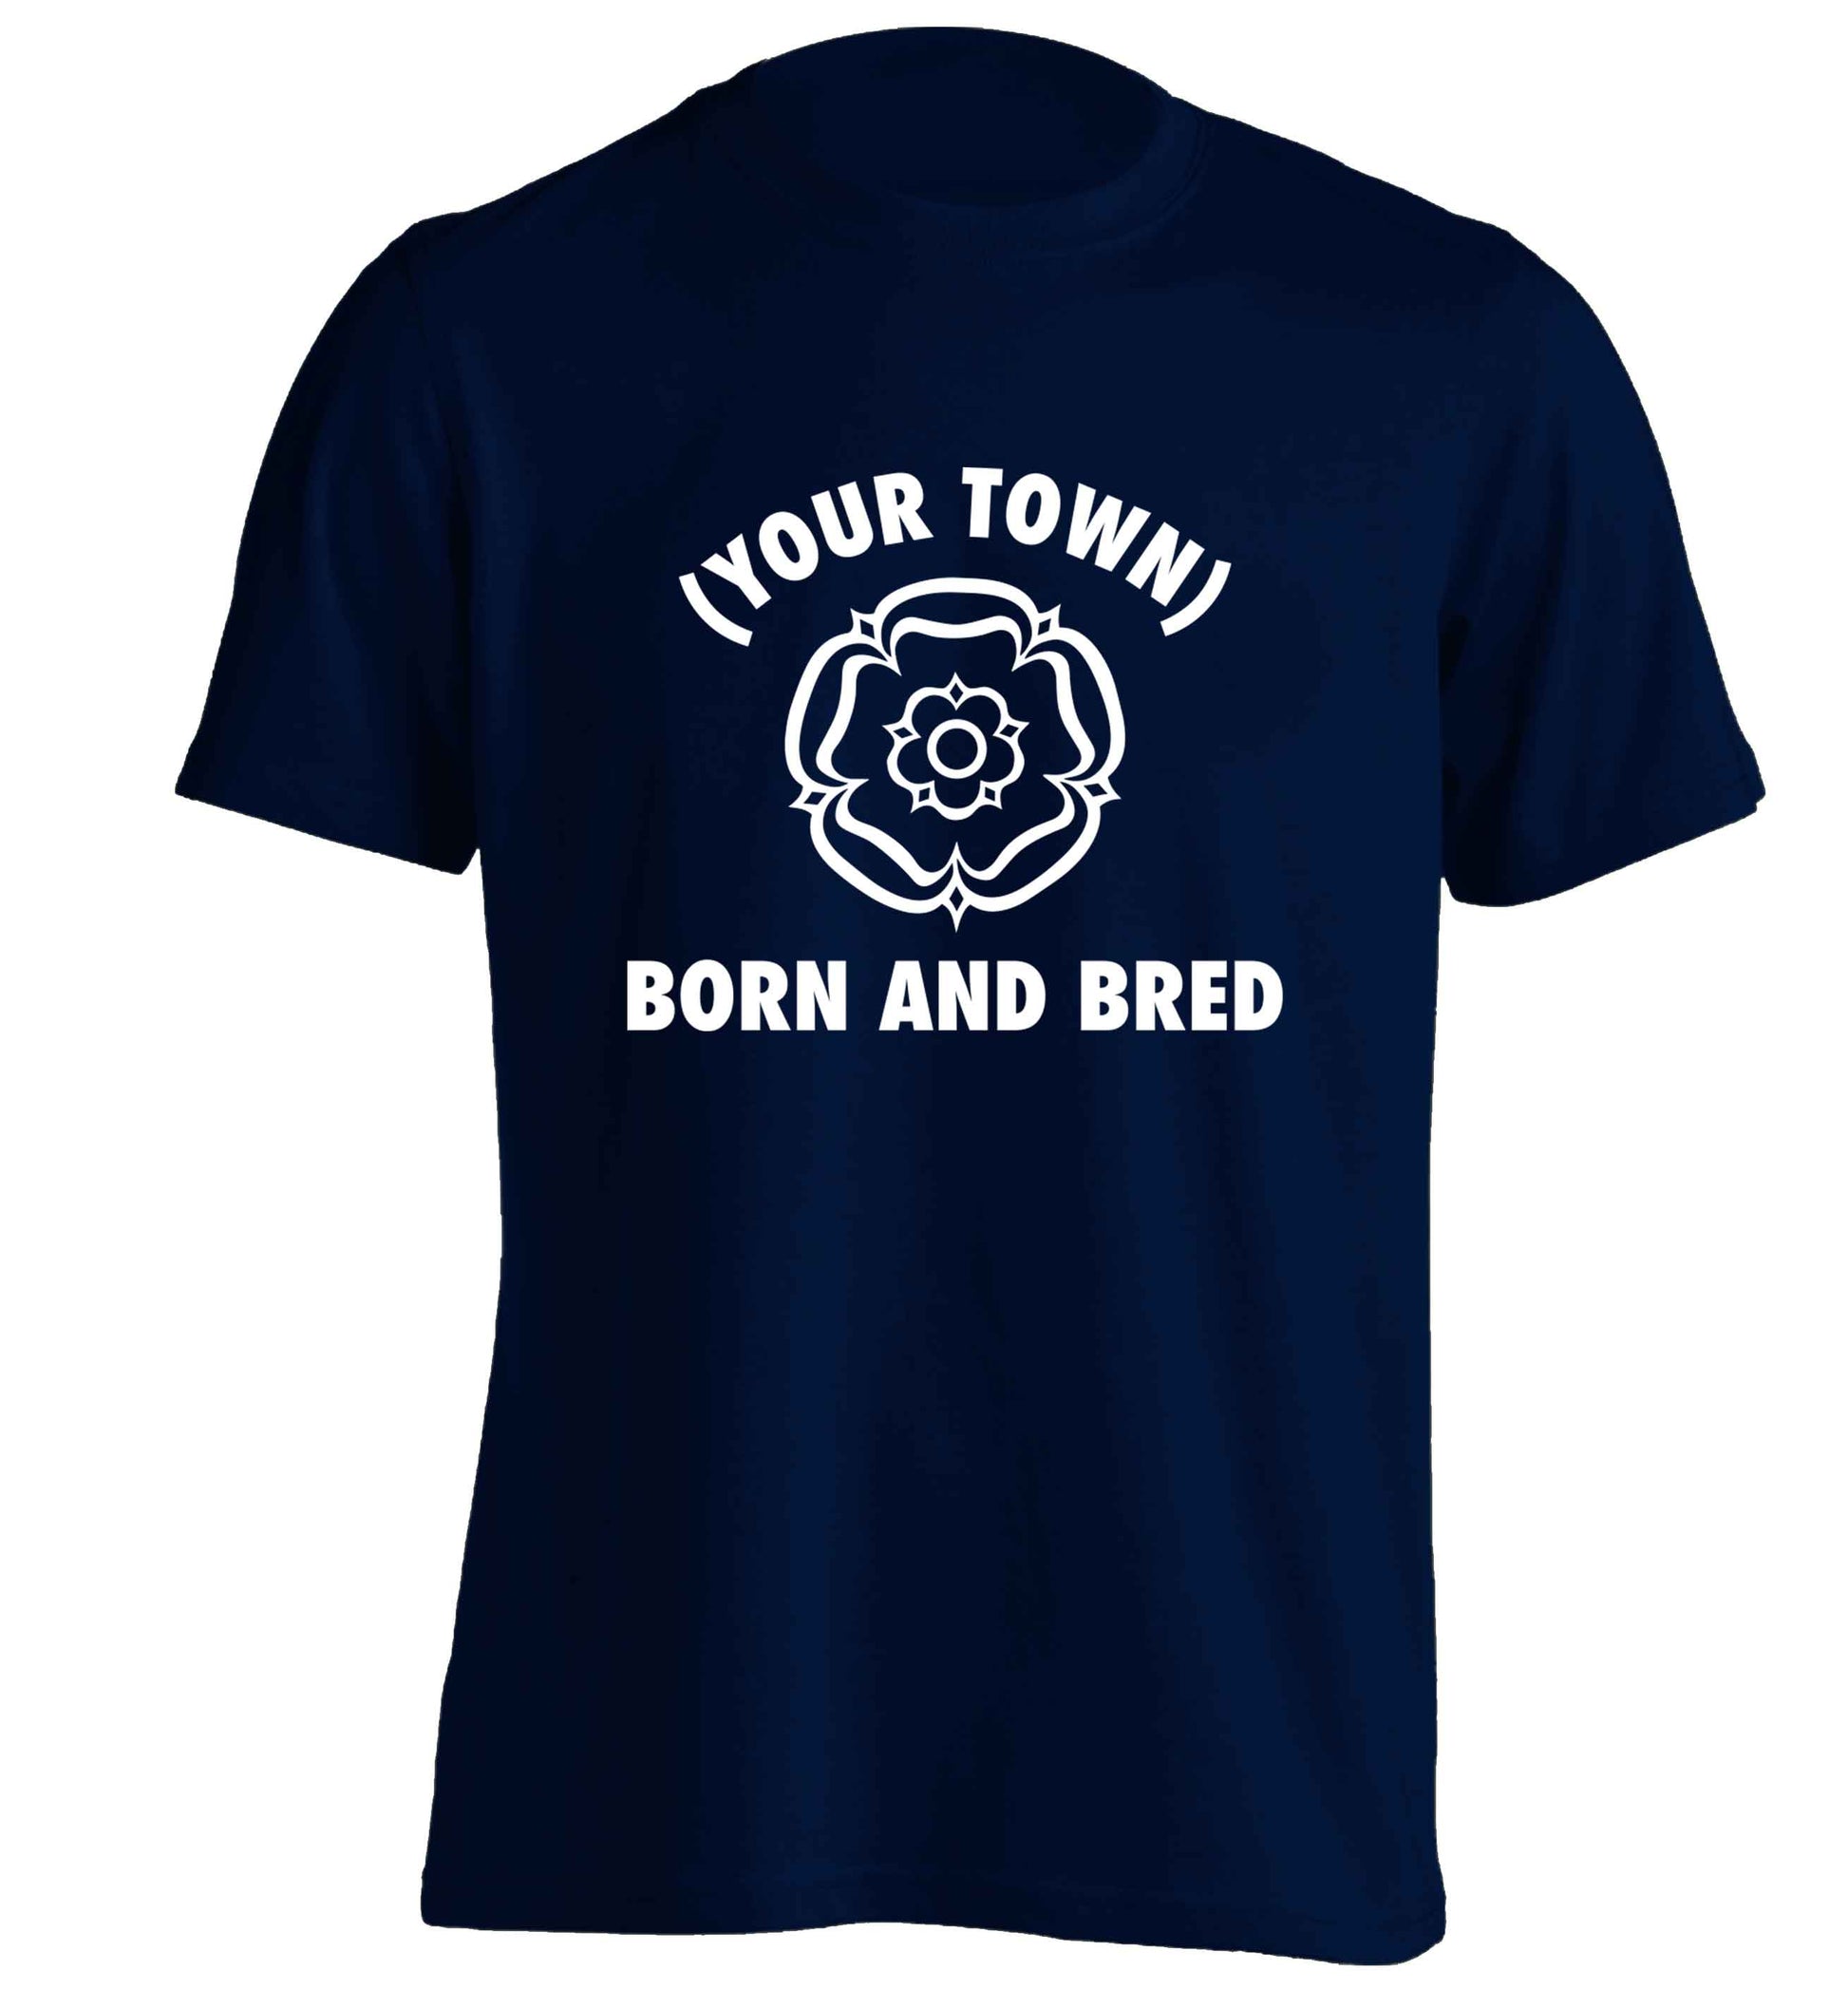 Personalised born and bred adults unisex navy Tshirt 2XL